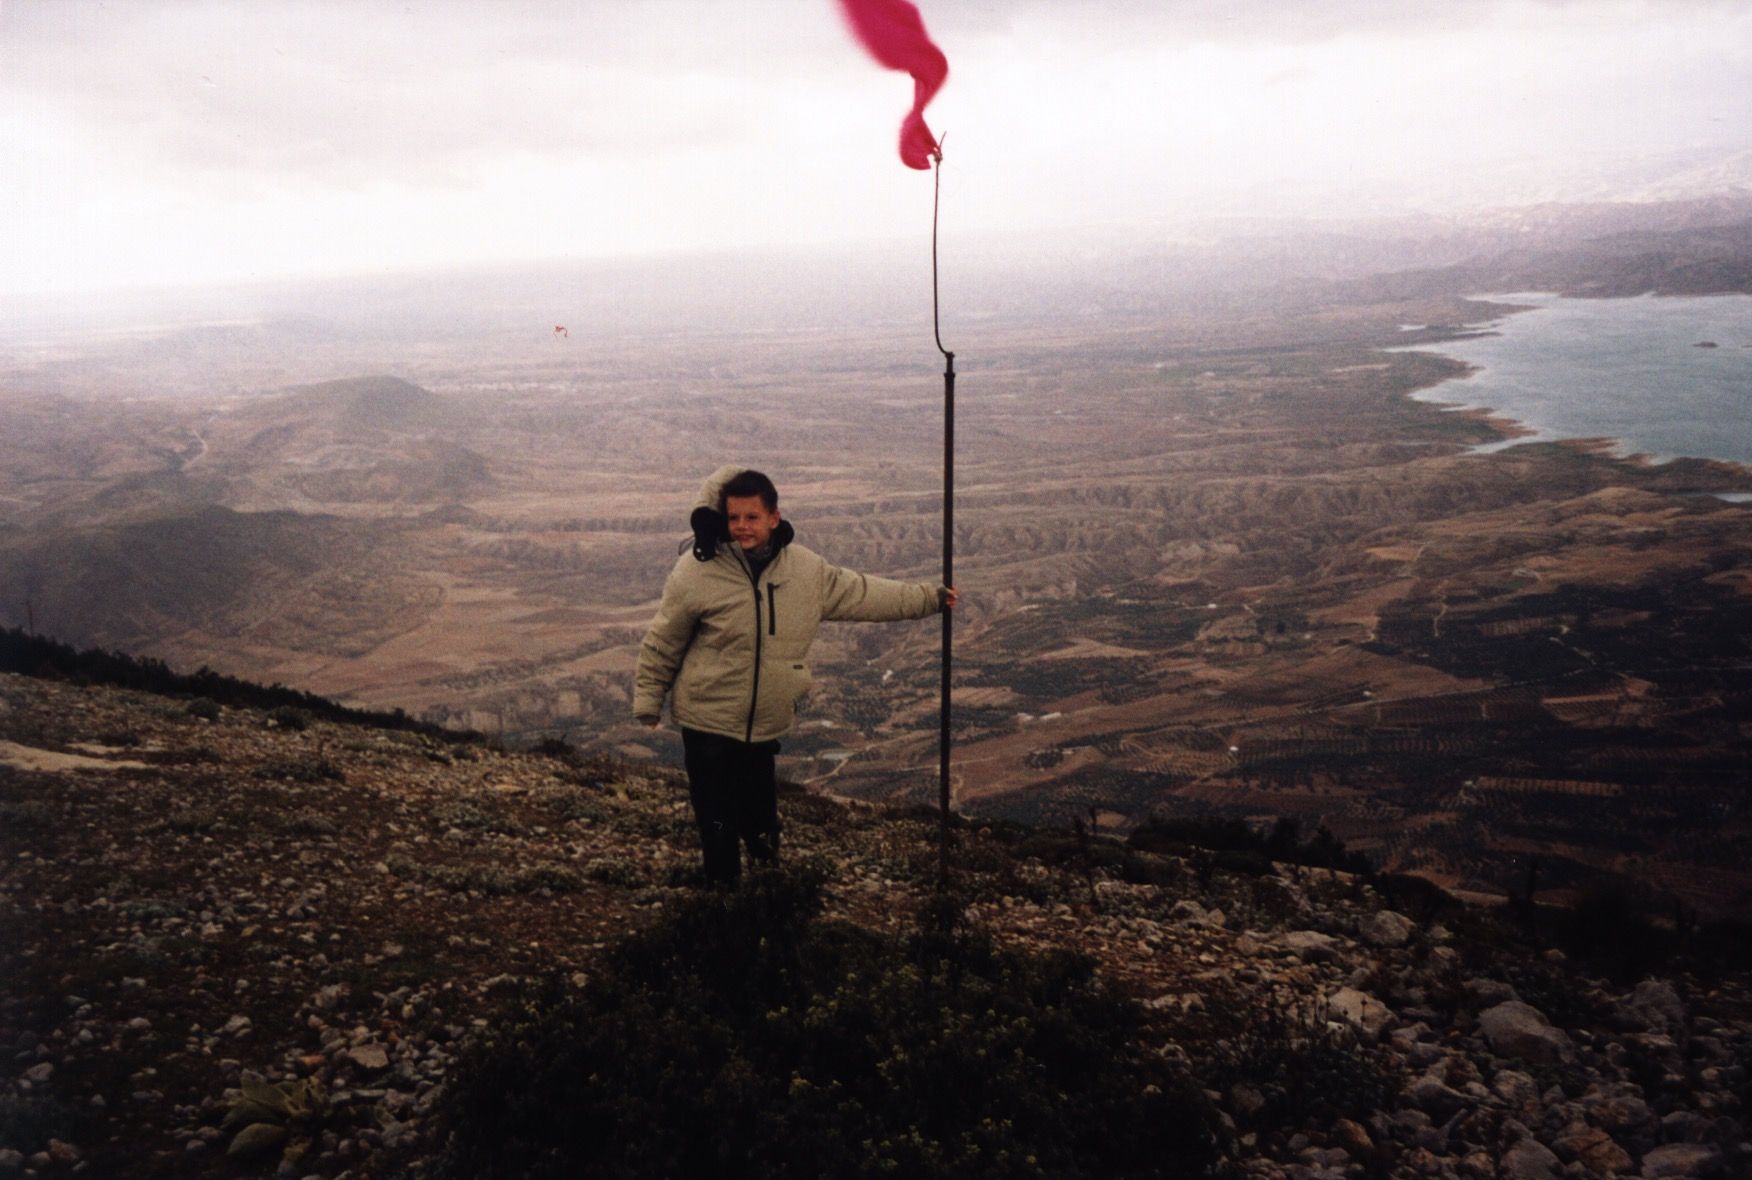 Me standing besides a flag on top of a mountain.